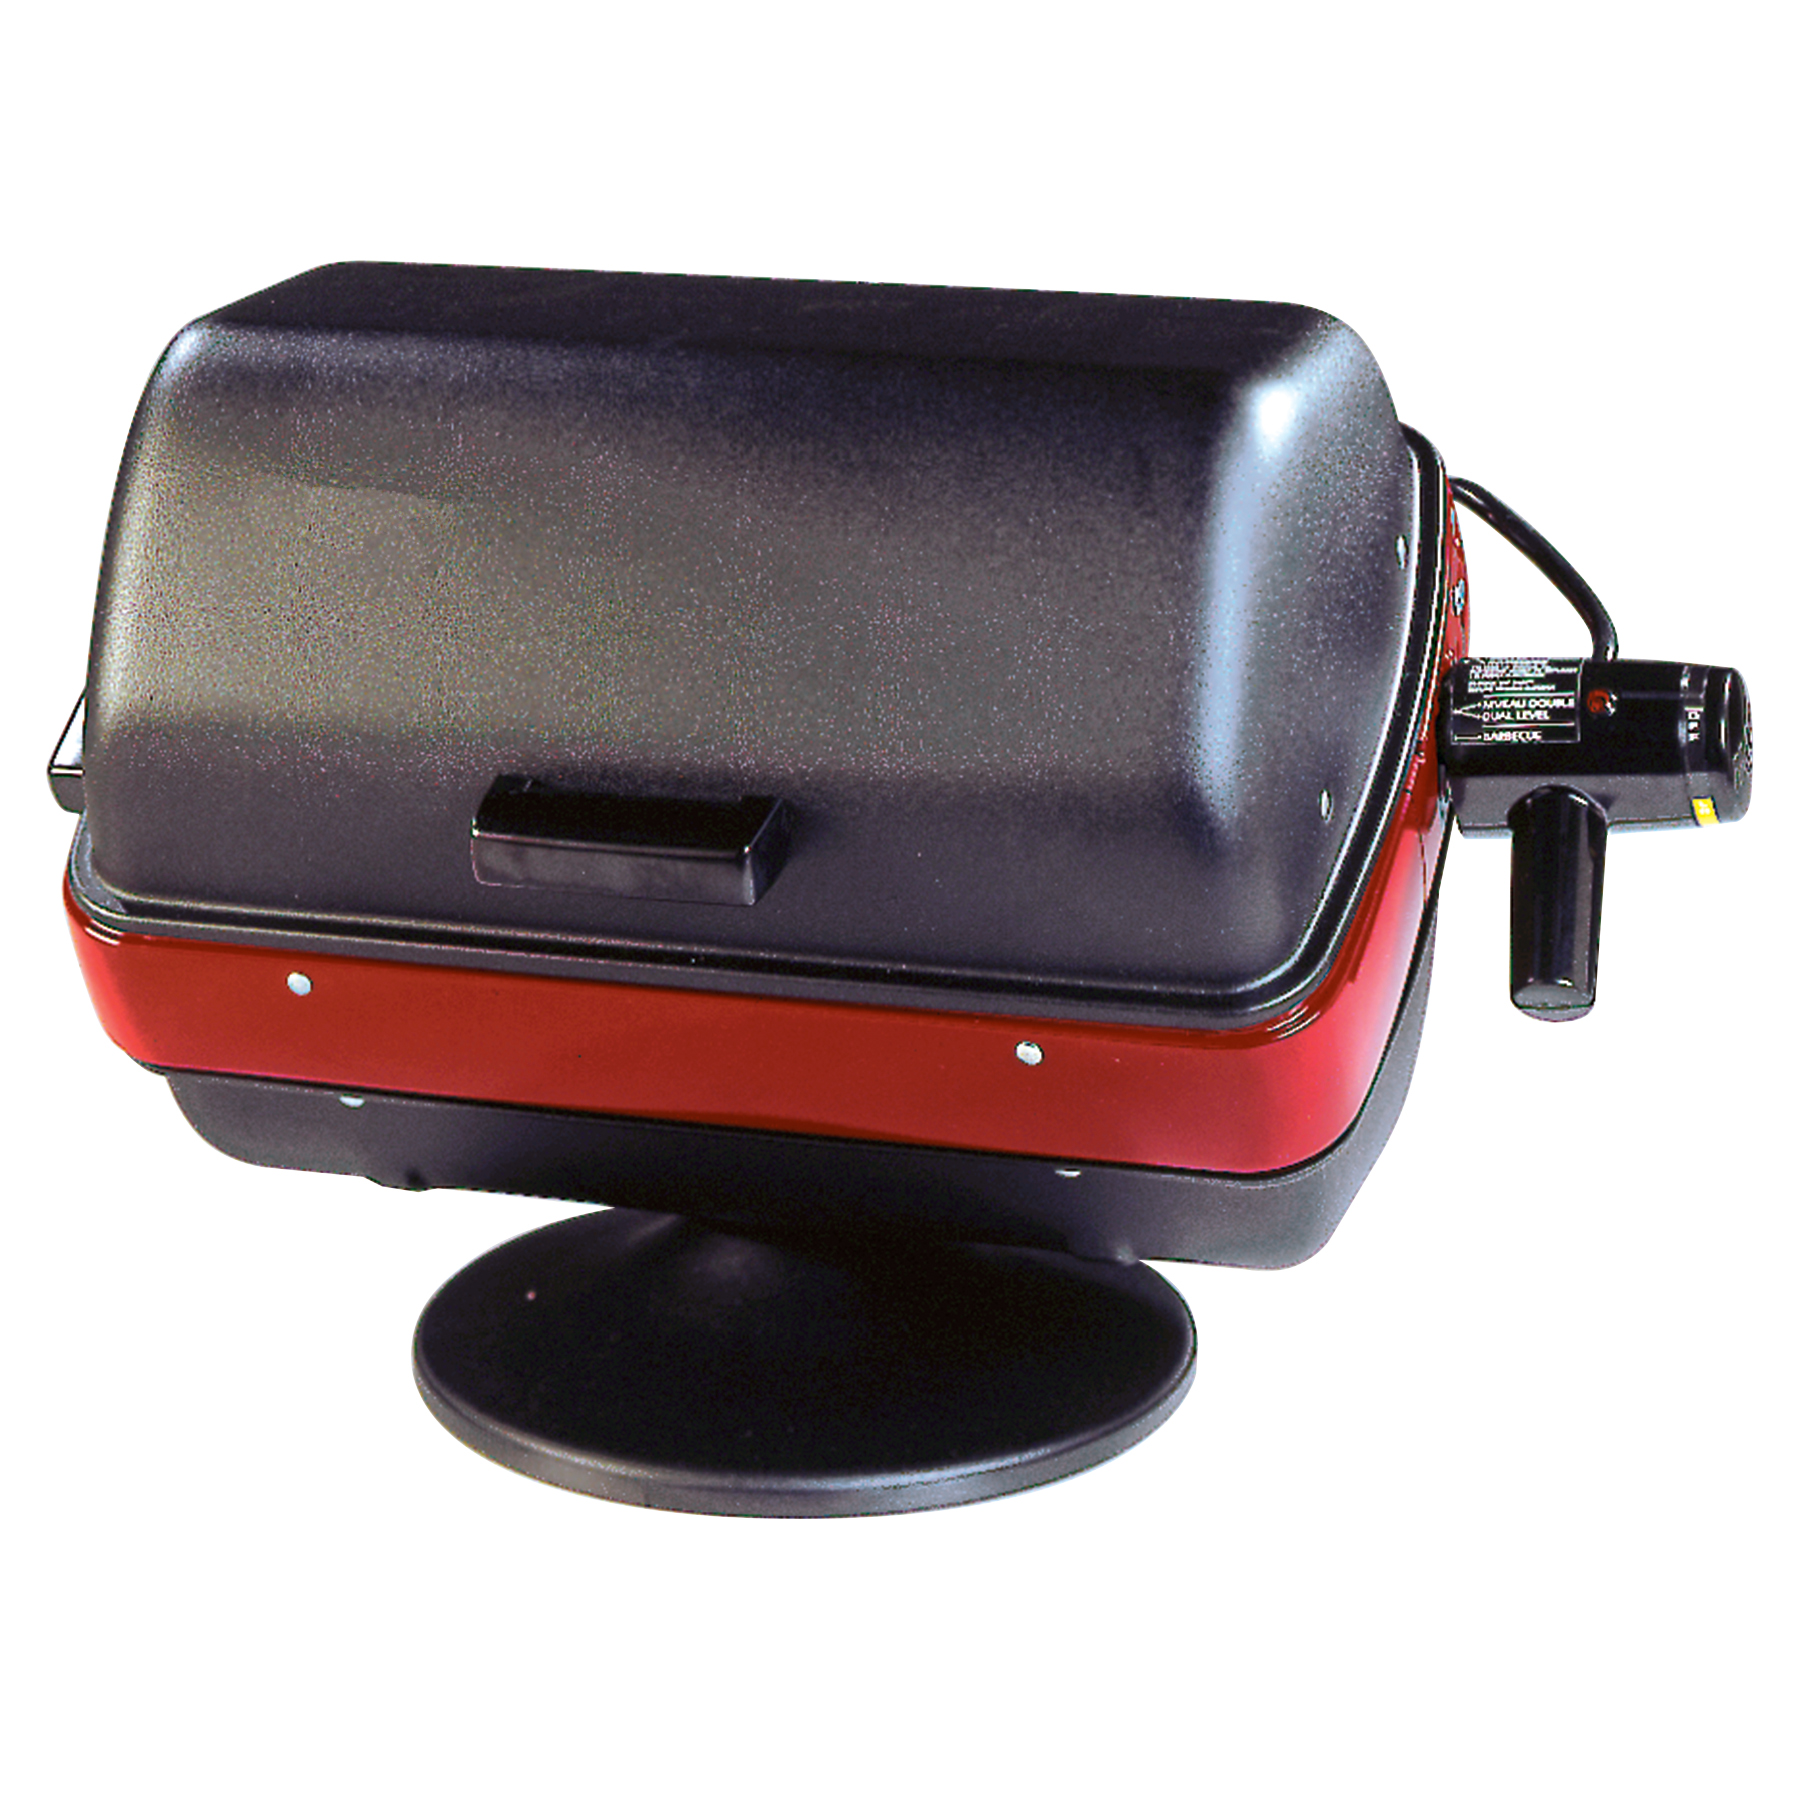 Americana Electric Tabletop Grill with 3-position element-Model